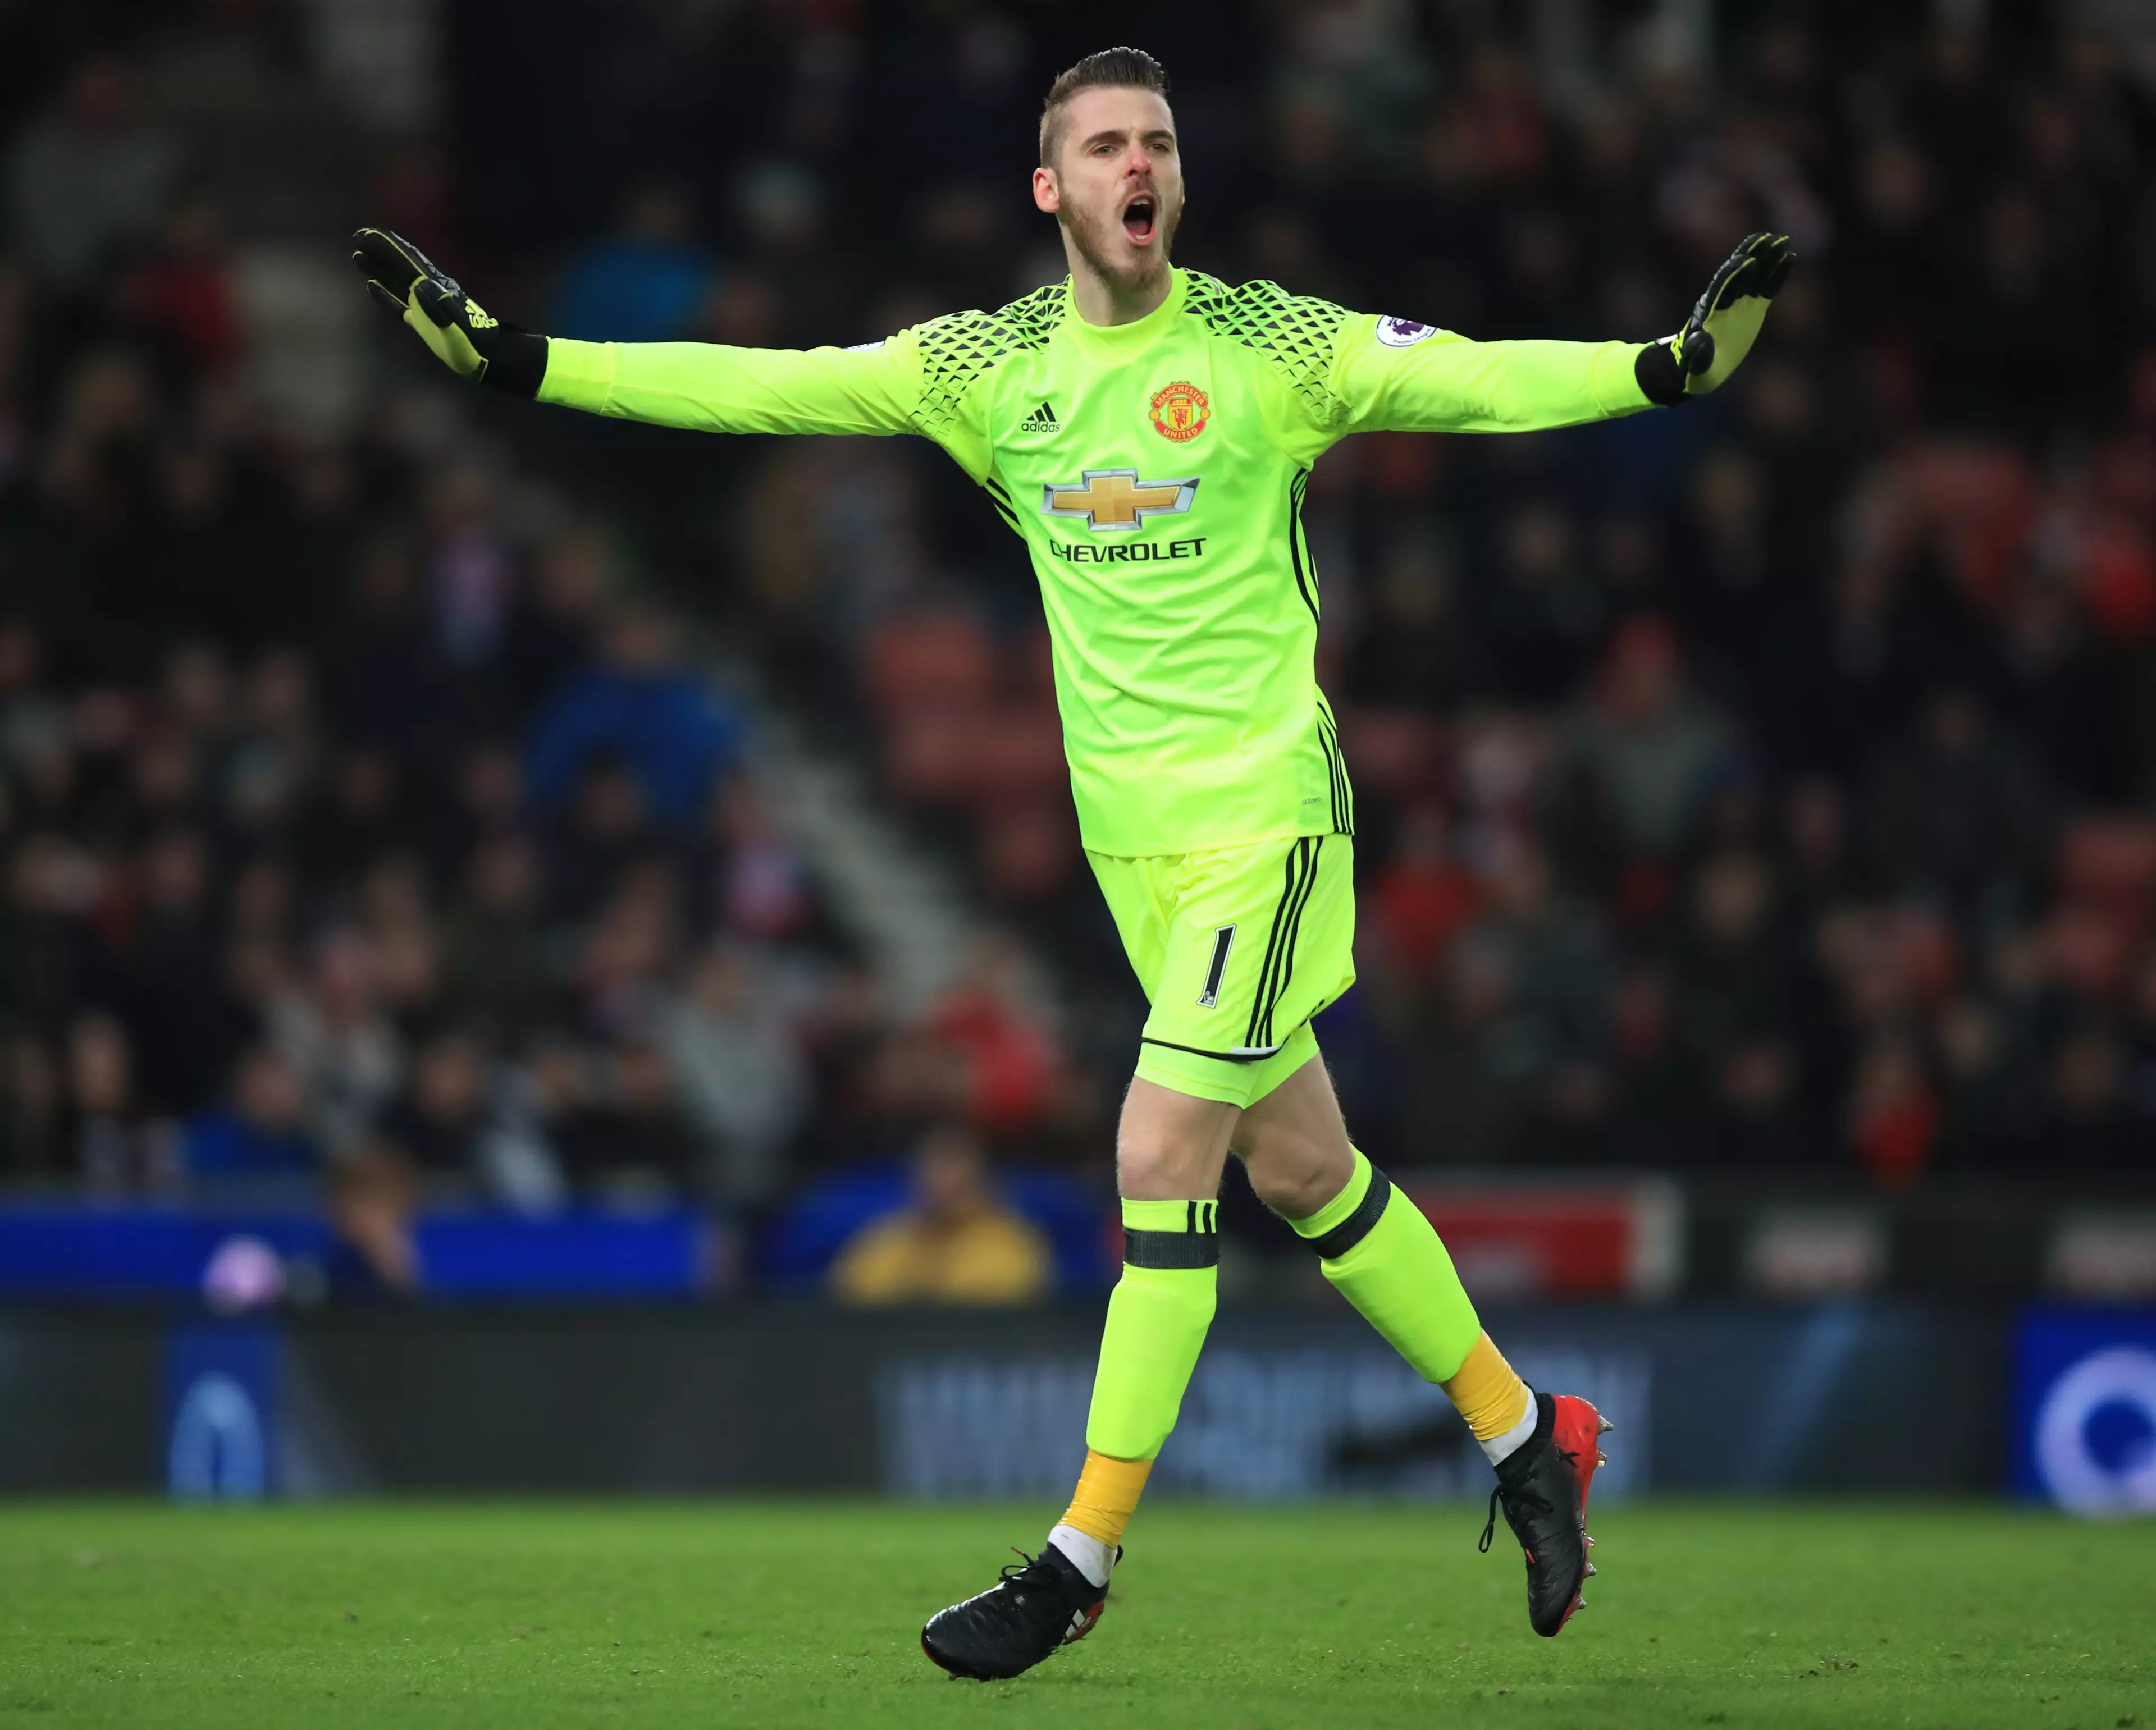 United fans will be so relieved if De Gea signs the new deal. Image: PA Images.